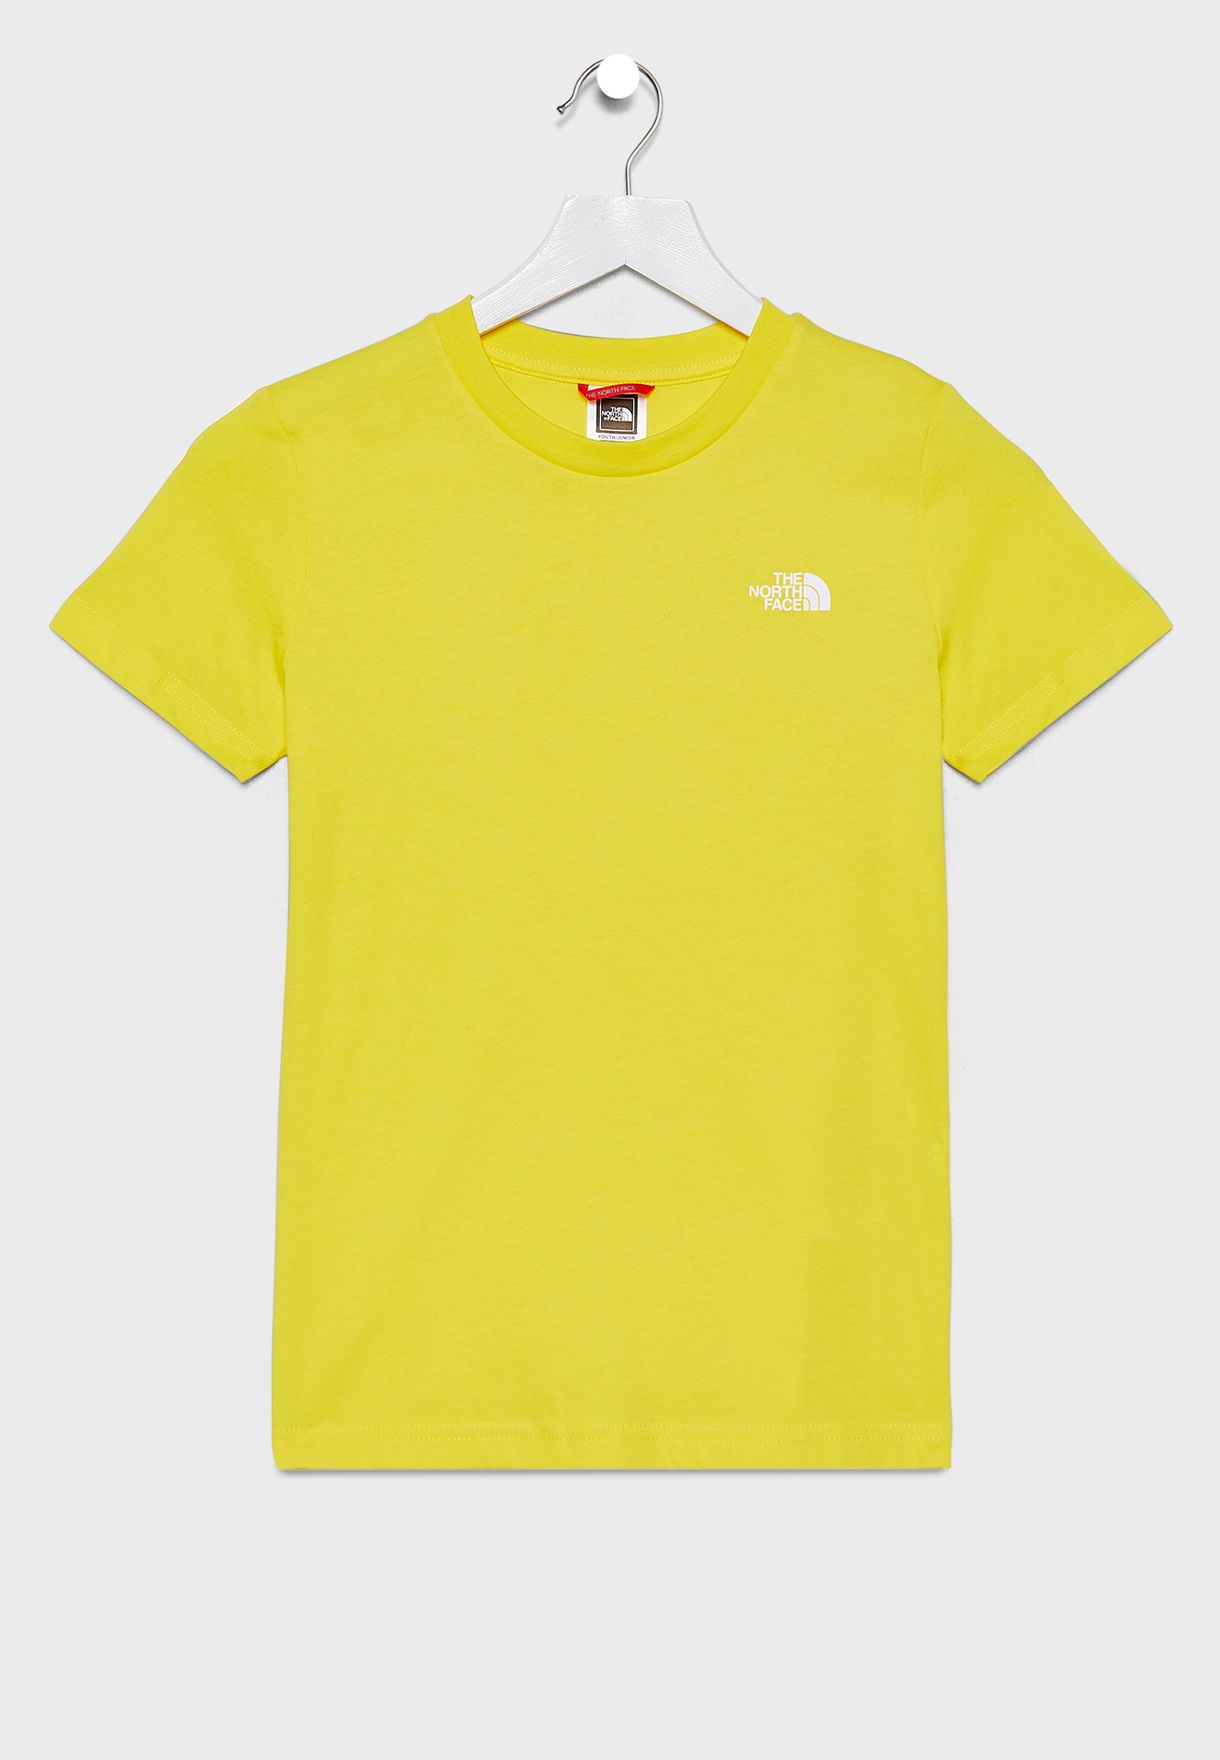 north face t shirt youth